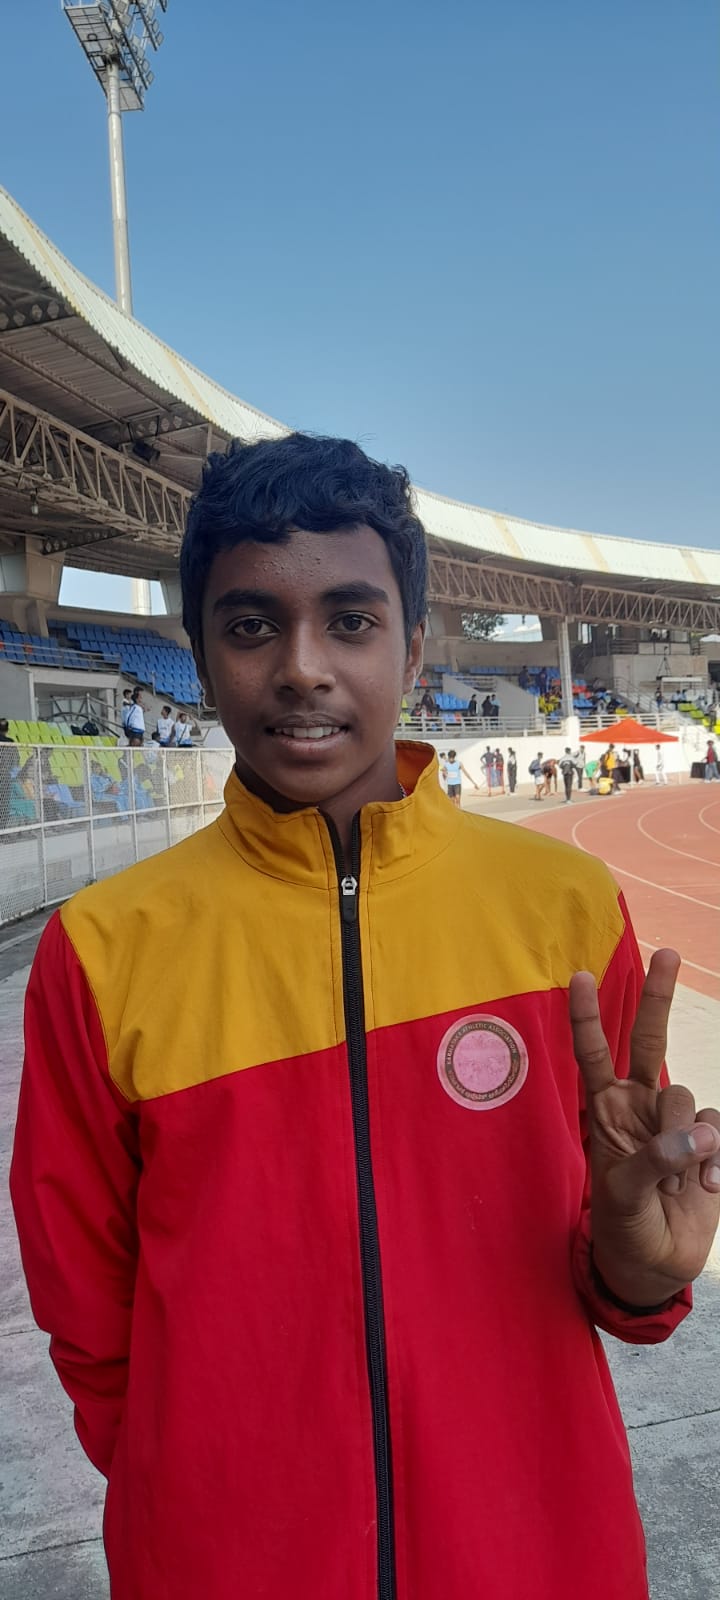 <ul><li><strong>The following students also participated in the33rd National South Zone Athletics Championship:</strong></li></ul><strong> Deekshith.K</strong>  participated in Boys U-16 - High Jump event, <strong>Advika.A</strong> participated in Girls U-16 Hexathlon  event and <strong>Rishi.G.N </strong>participated in  Boys U-14 High jump event.<ul><li><strong>K - Boys U-16 High jump</strong></li></ul>